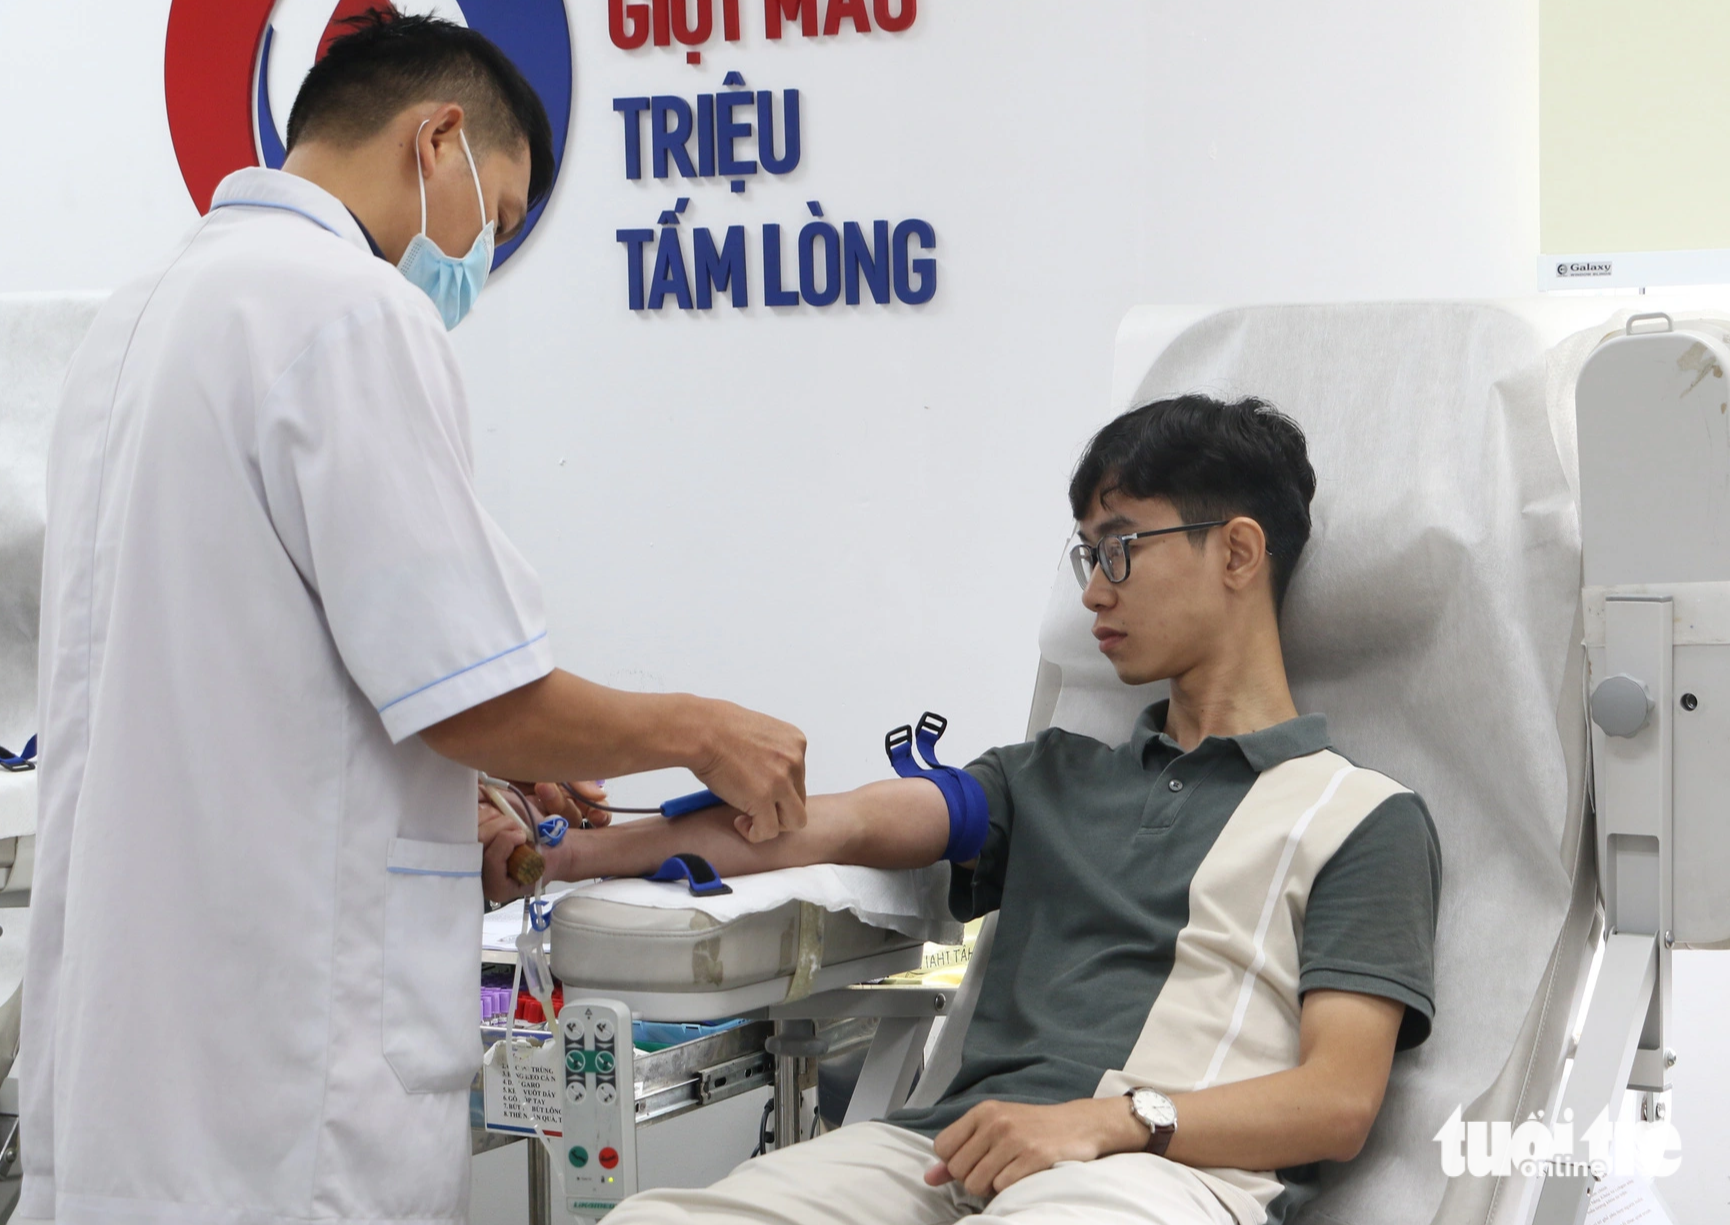 Intel employee Mr Phan Vu Ngoc Thien said he has donated blood for the Thues Dream program for the past seven years - Photo: Binh Minh